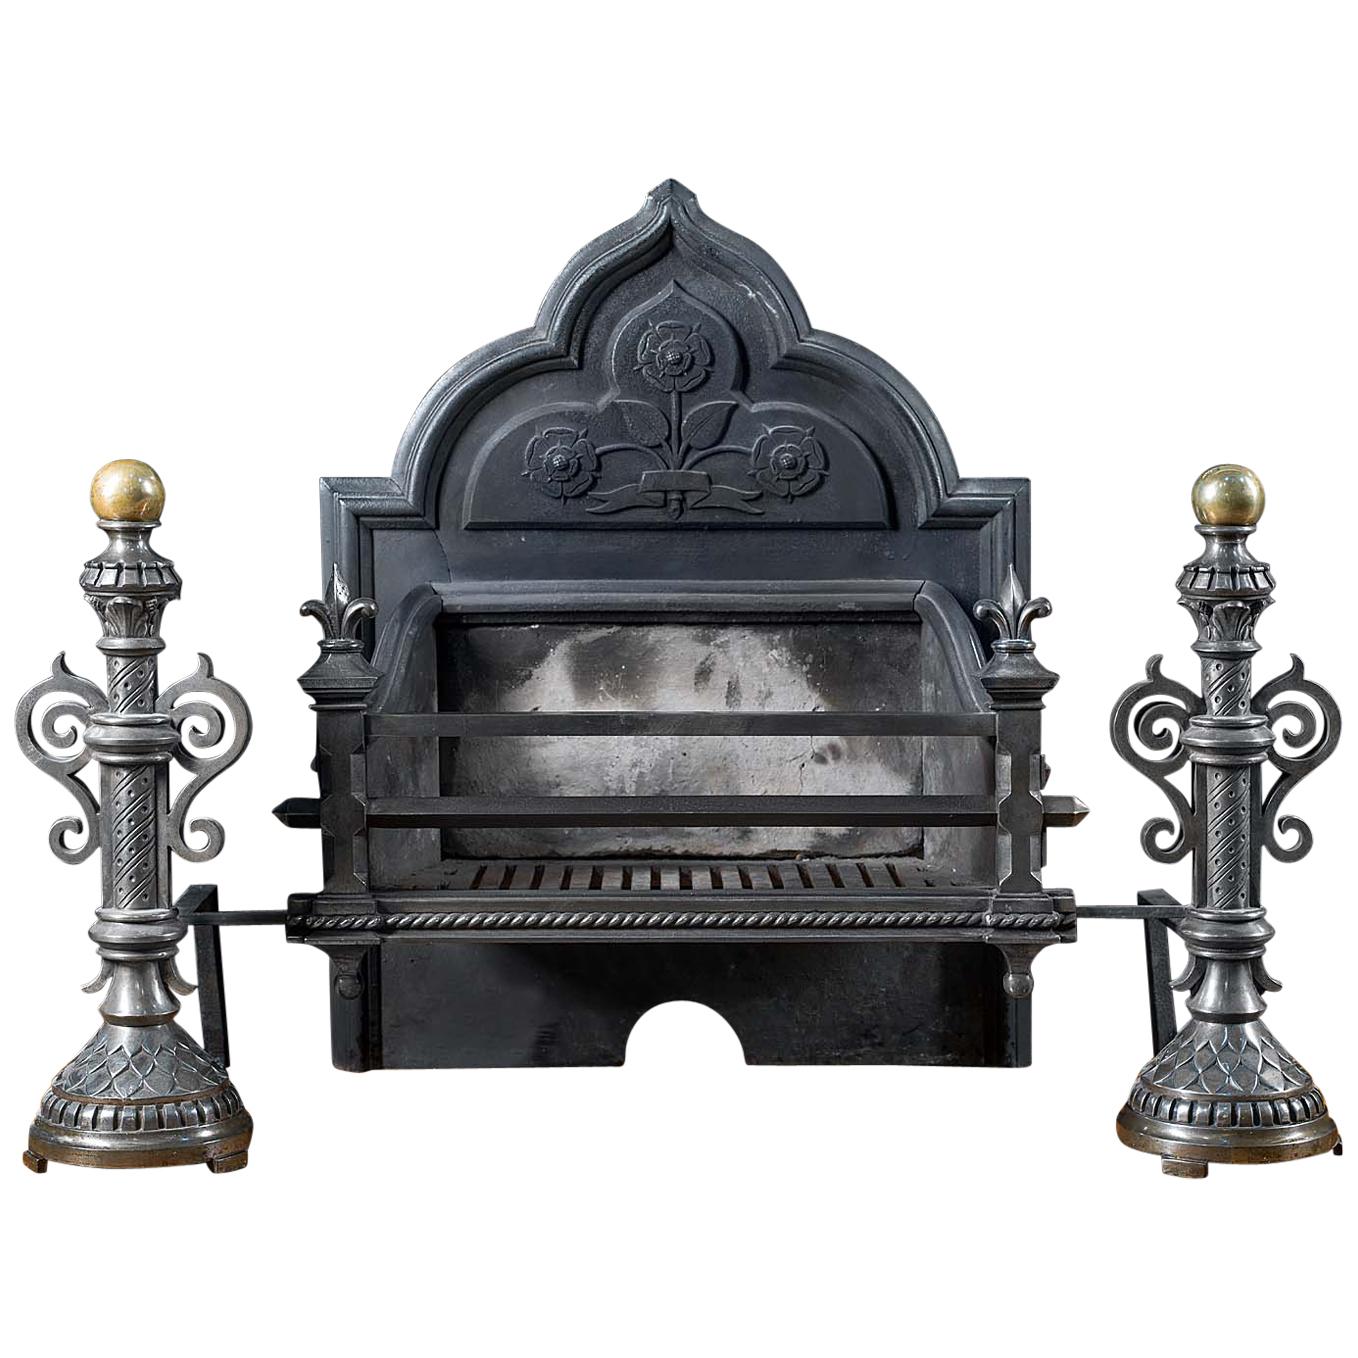 19th Century Gothic Revival Fire Grate in the Manner of A.W.N. Pugin